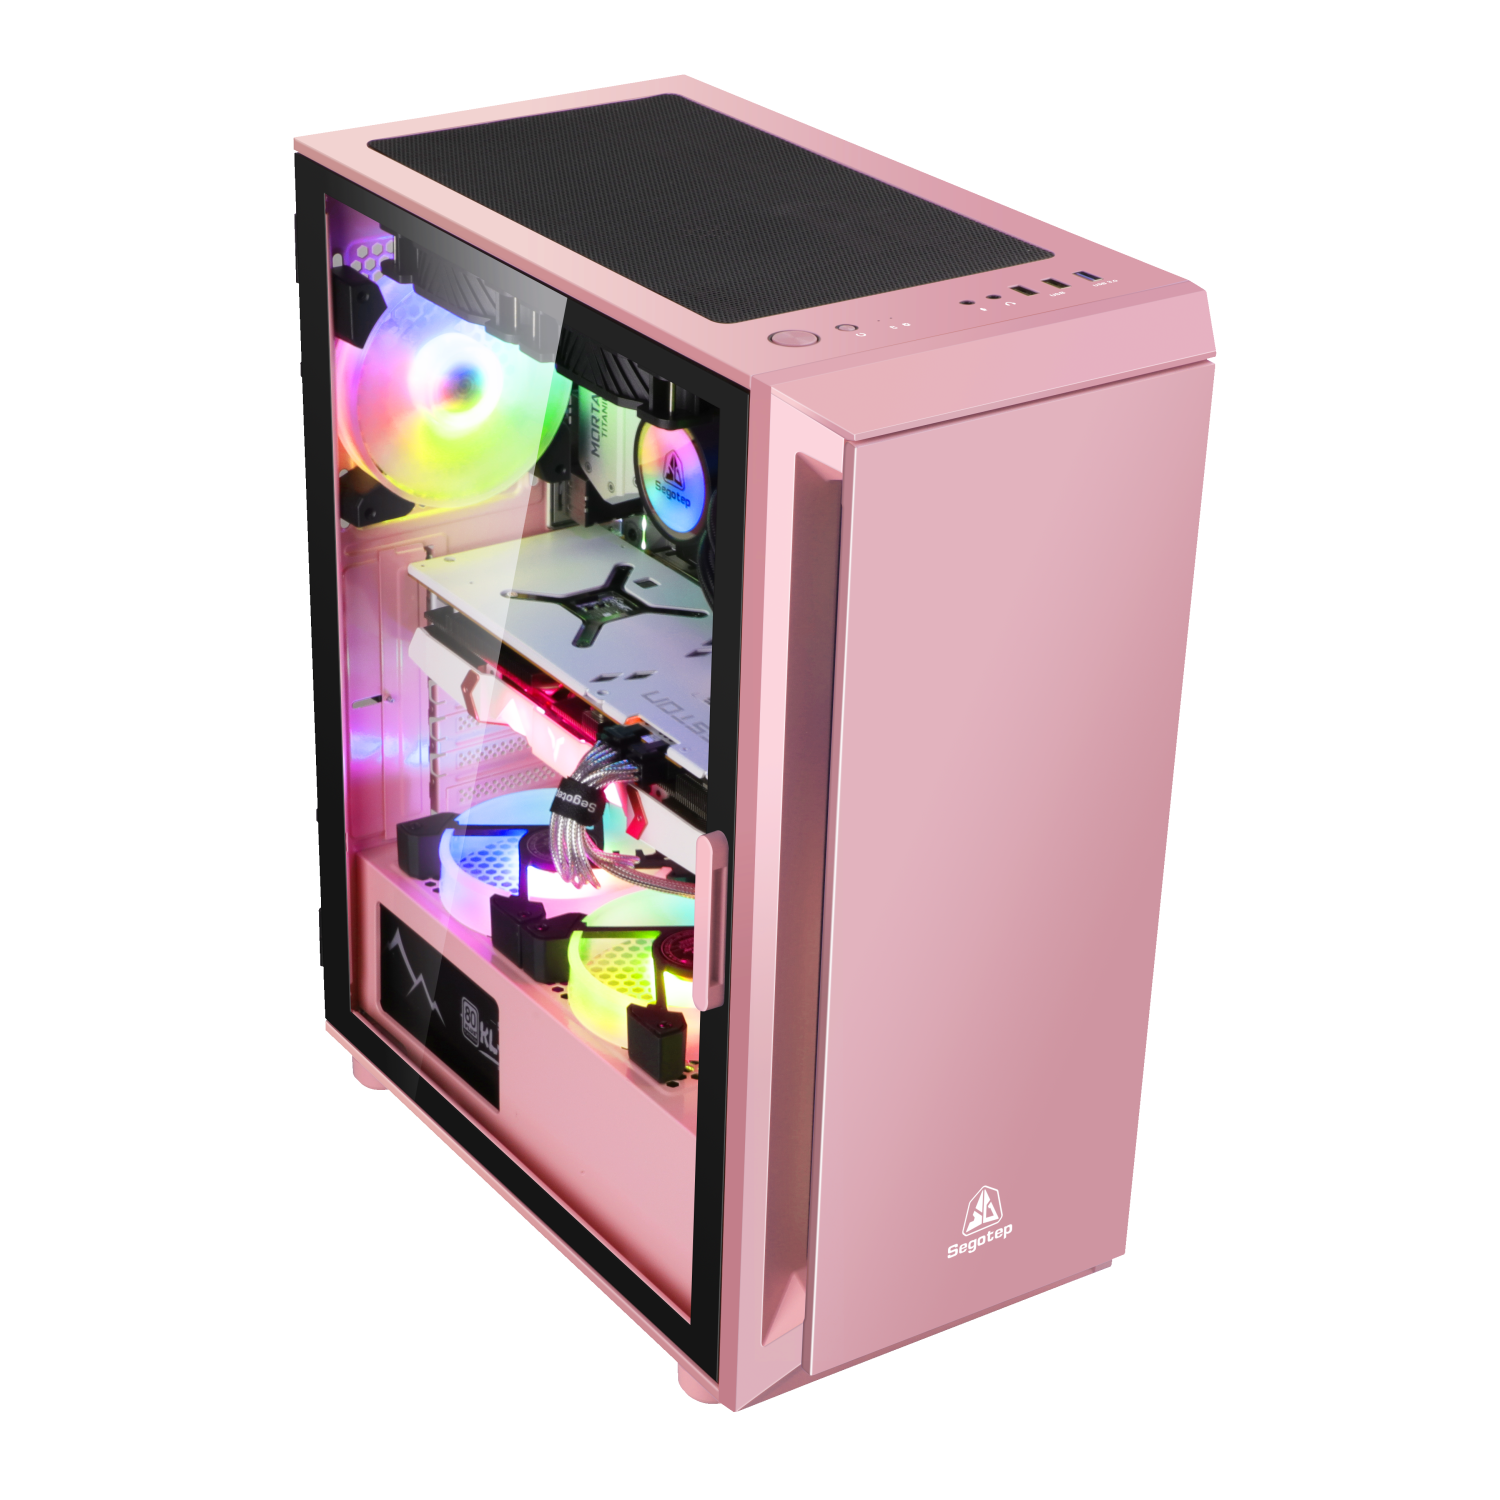 Segotep Gank 5 Gaming Computer case Support ATX, Micro-ATX, Mini-ITX Mid Case.Tempered Glass Side Panel, ATX Mid Tower, PC Case Pink